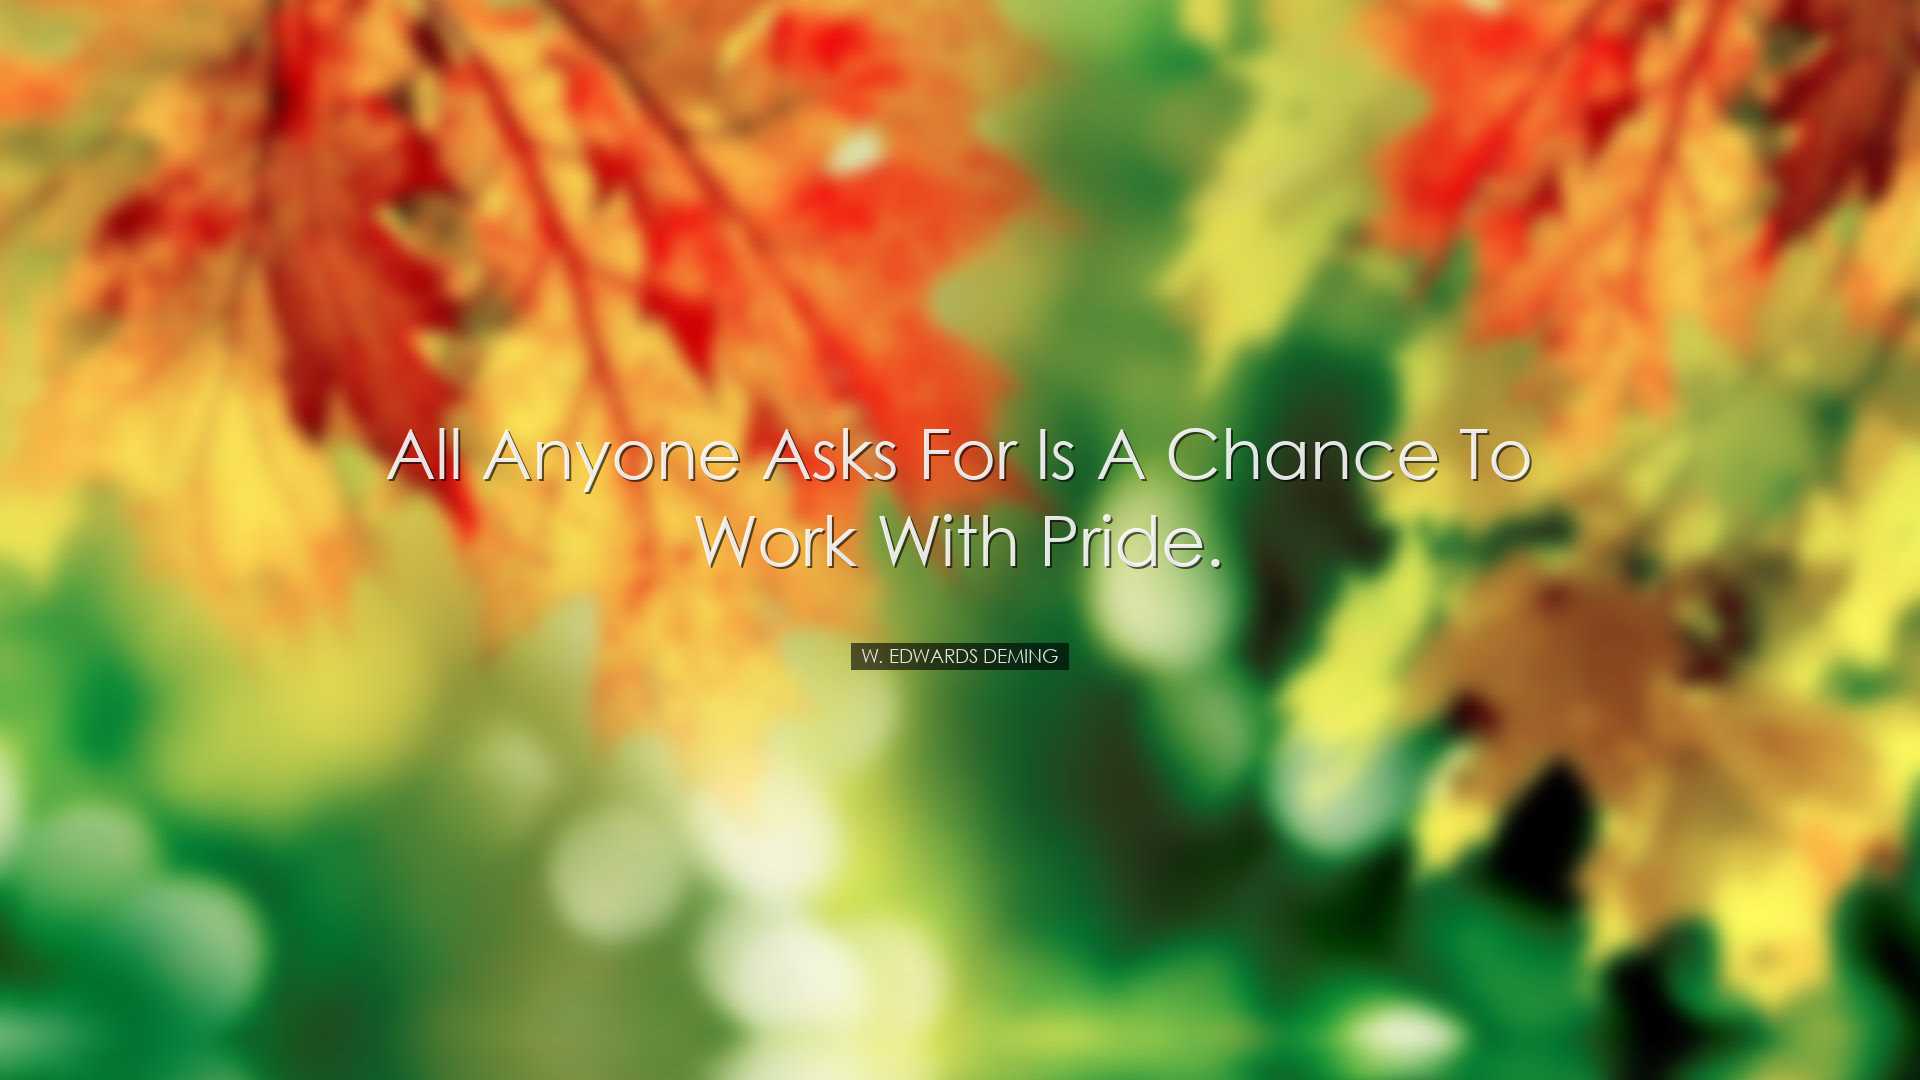 All anyone asks for is a chance to work with pride. - W. Edwards D